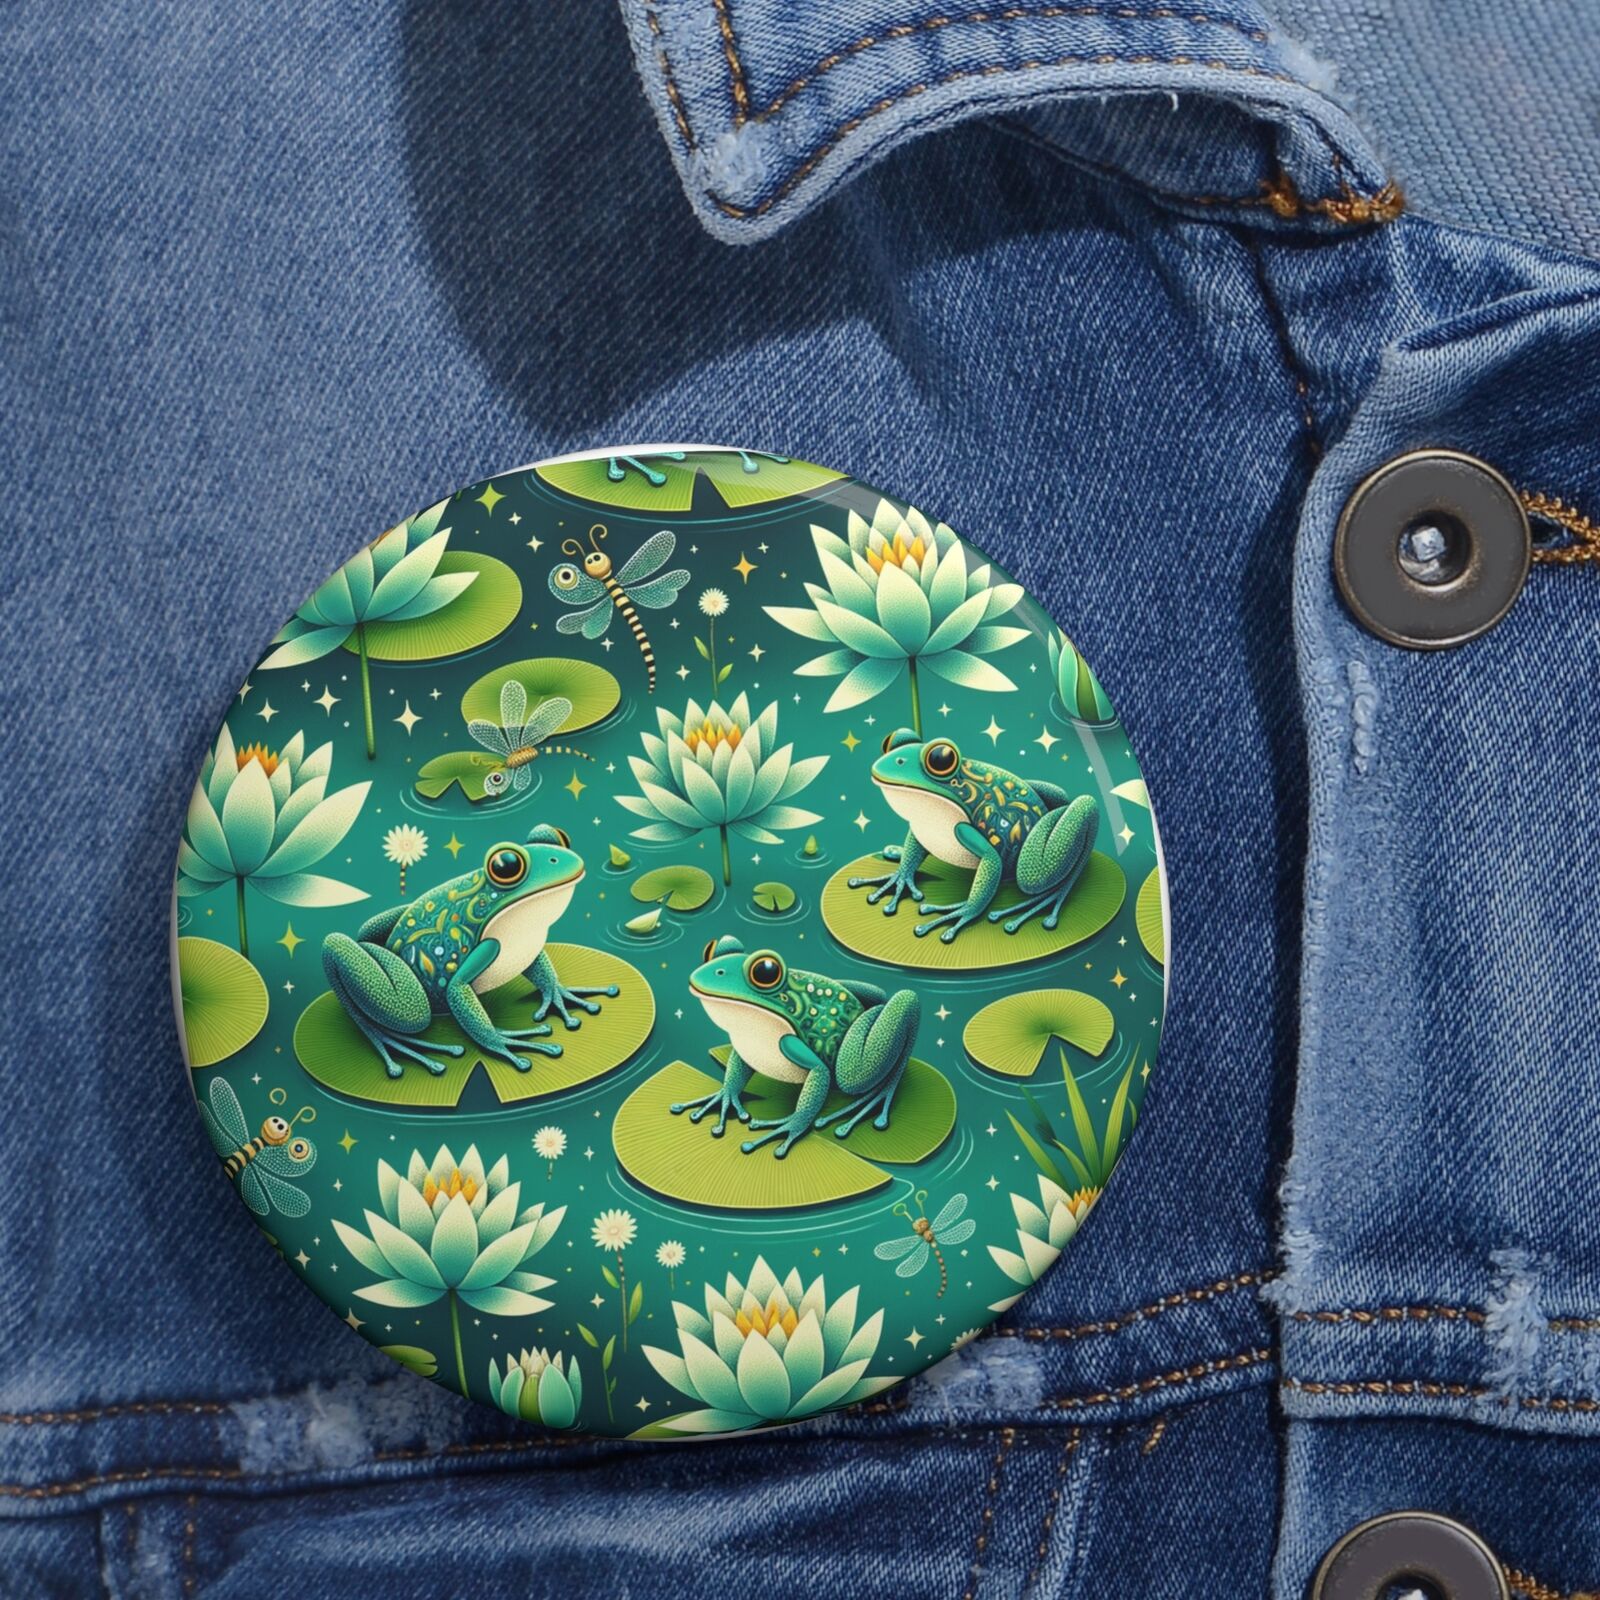 Custom Pin Button Badge Frogs Waterlilies Biodiversity Pond Nature Dragonfly